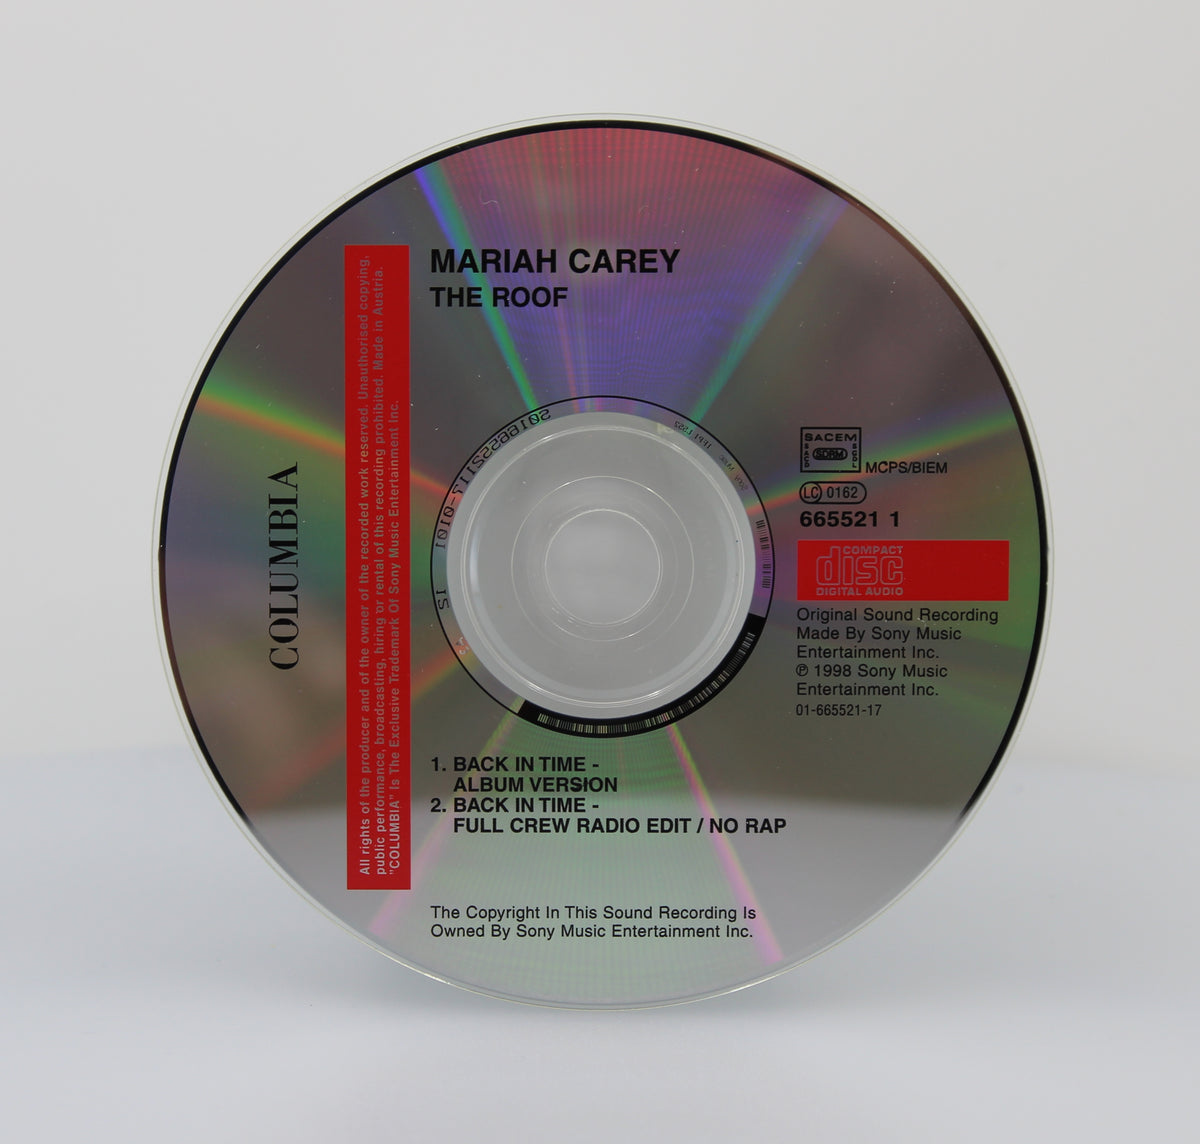 Mariah Carey ‎– The Roof (Back In Time), CD Single PROMO, Spain 1998